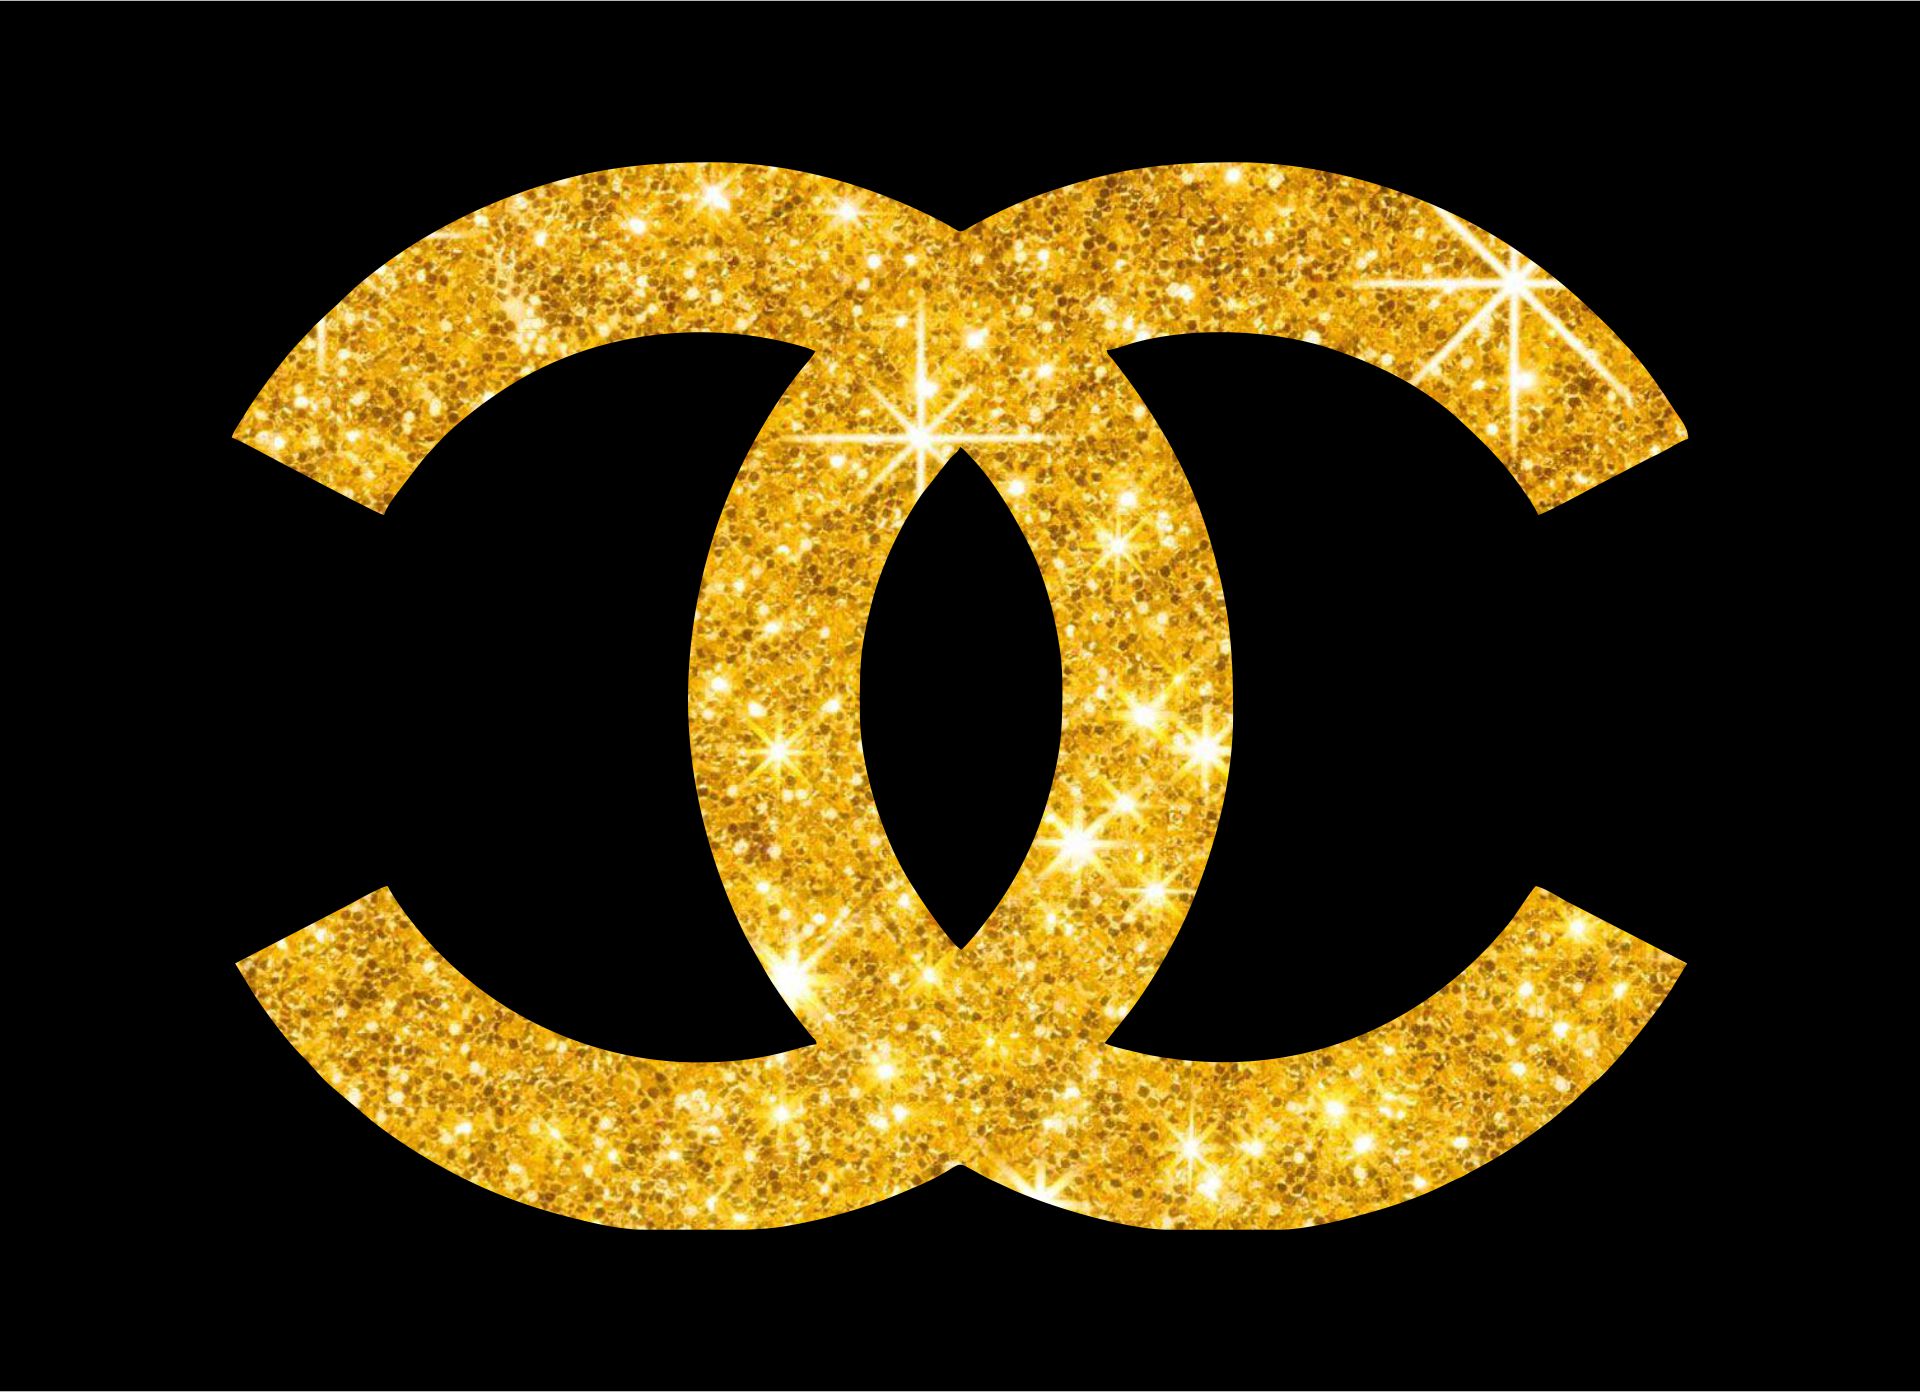 8 Best Images of Chanel Wall Art Free Printable - Coco Chanel Logo Clip